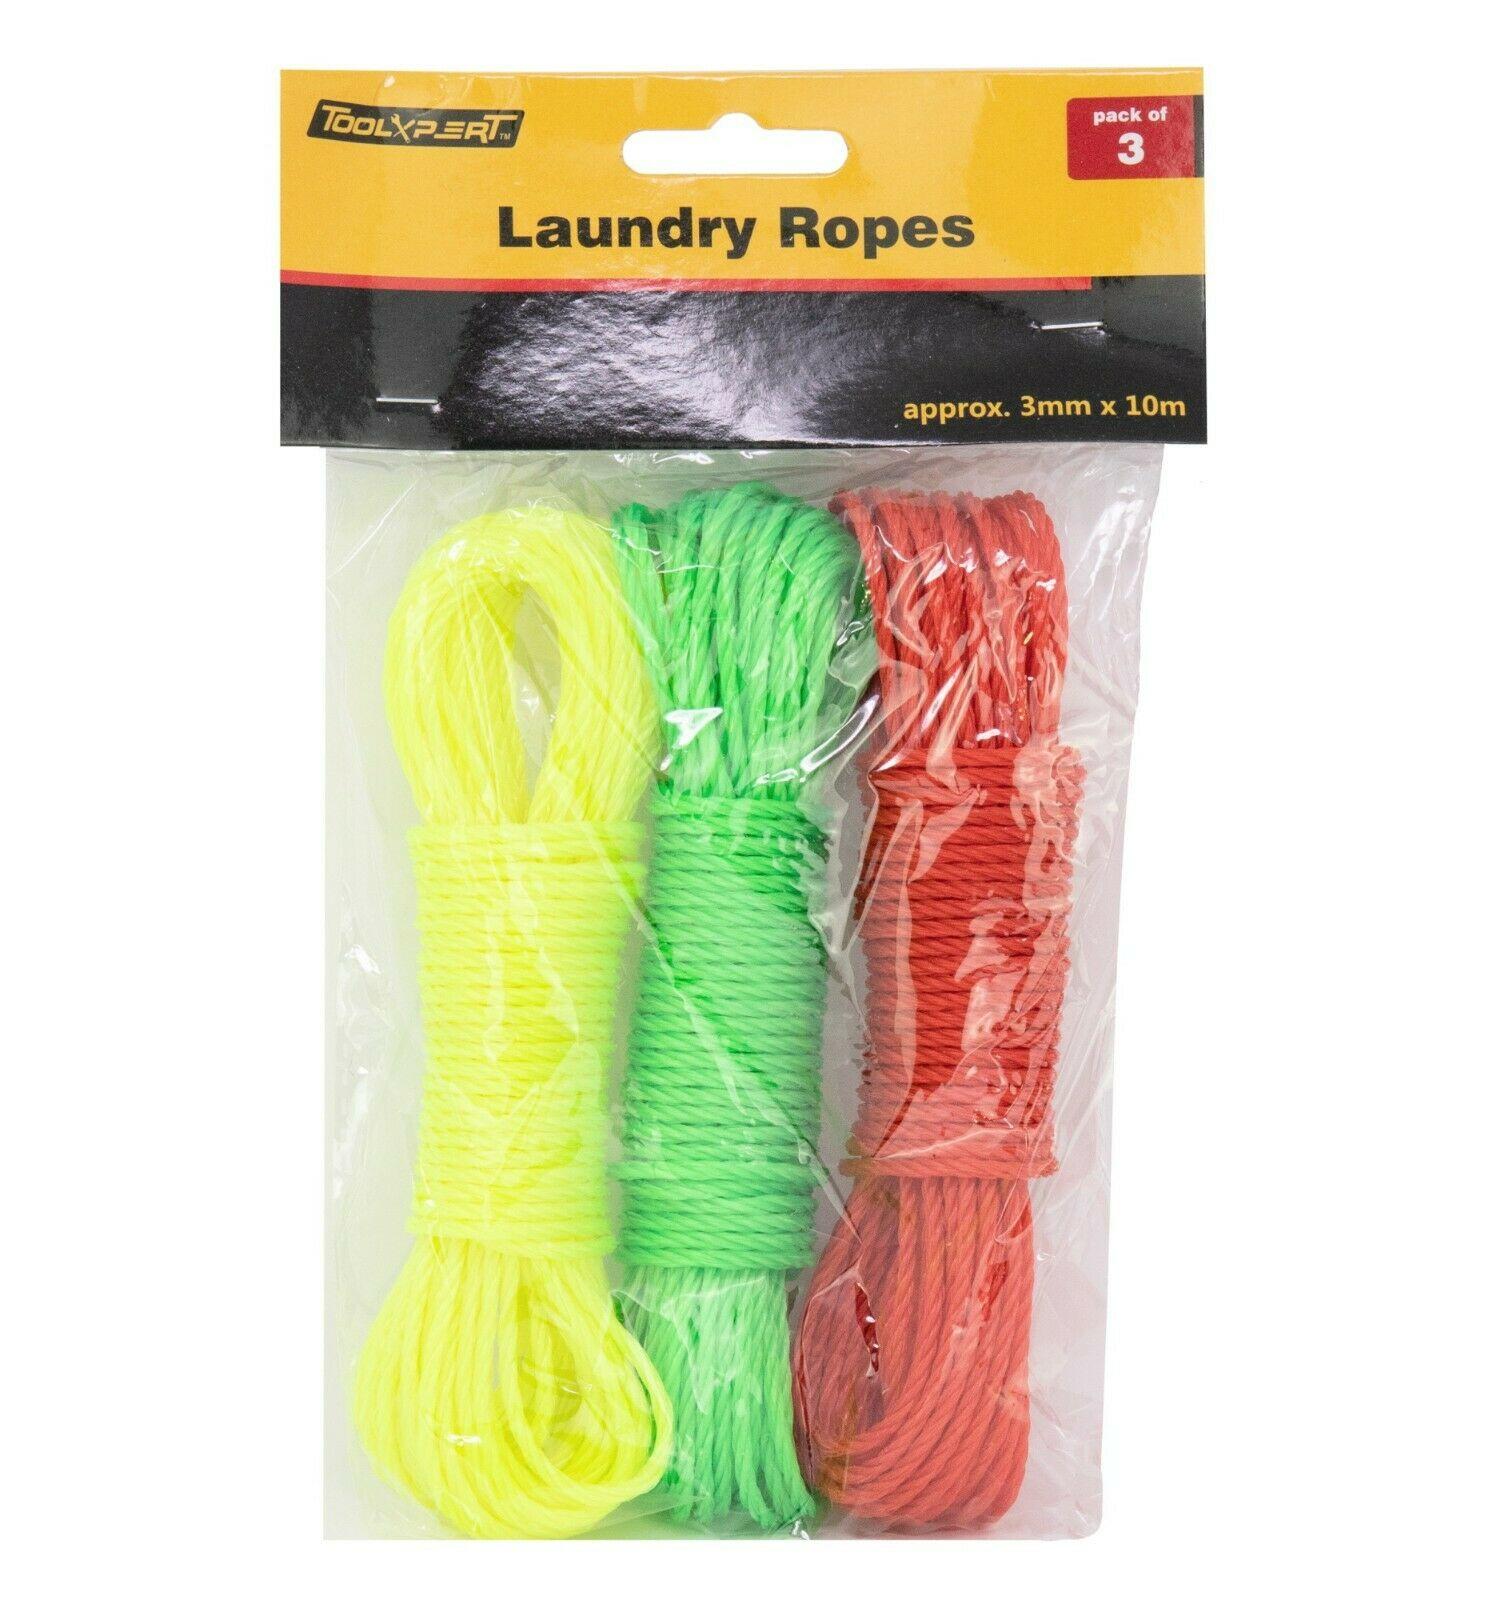 3 x 10m Washing Line Laundry Rope Dry Clothes Outdoor Garden